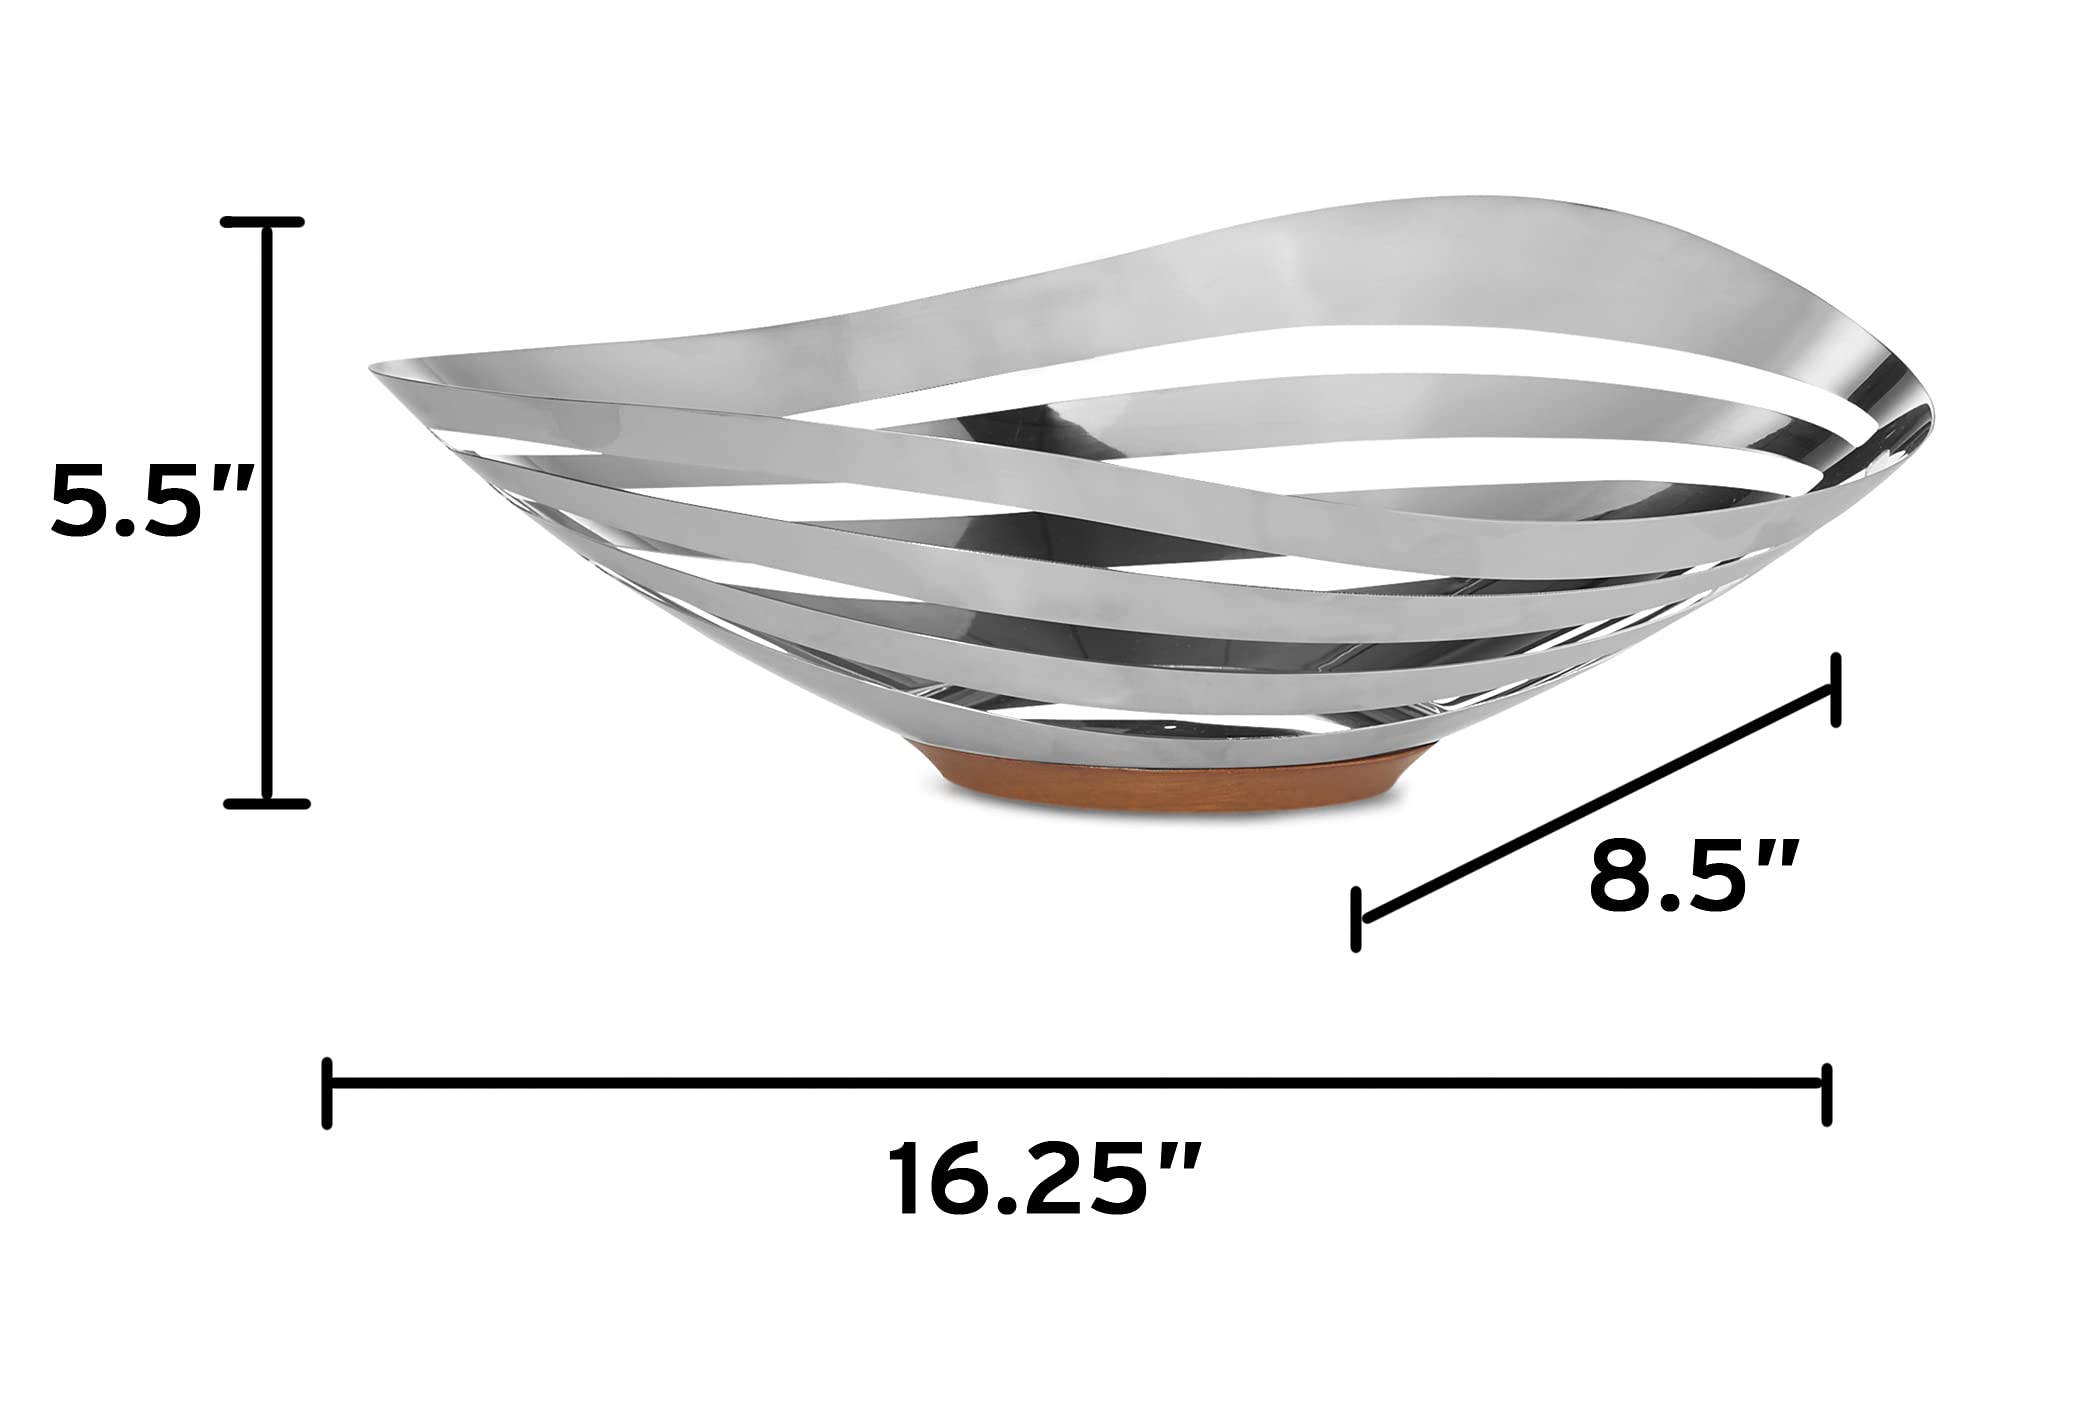 Nambe - Pulse Collection - Bread & Fruit Bowl - Measures at 16.25" x 8.5" x 5.5" - Made with Acacia Wood and Stainless Steel - Designed by Sena & Seidenfaden Design